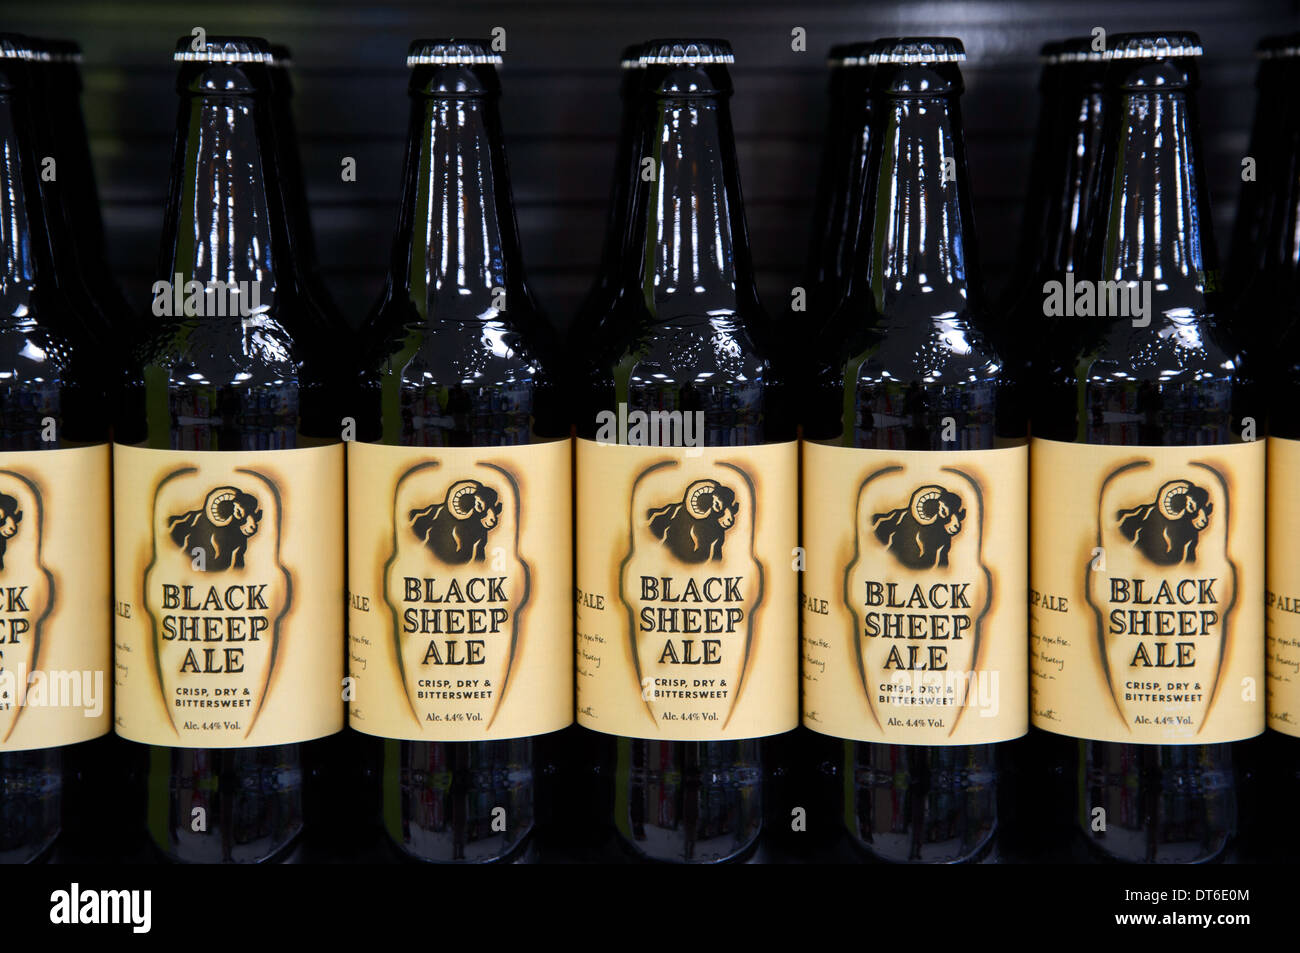 A row of Black Sheep beer bottles on a British supermarket shelf. Stock Photo